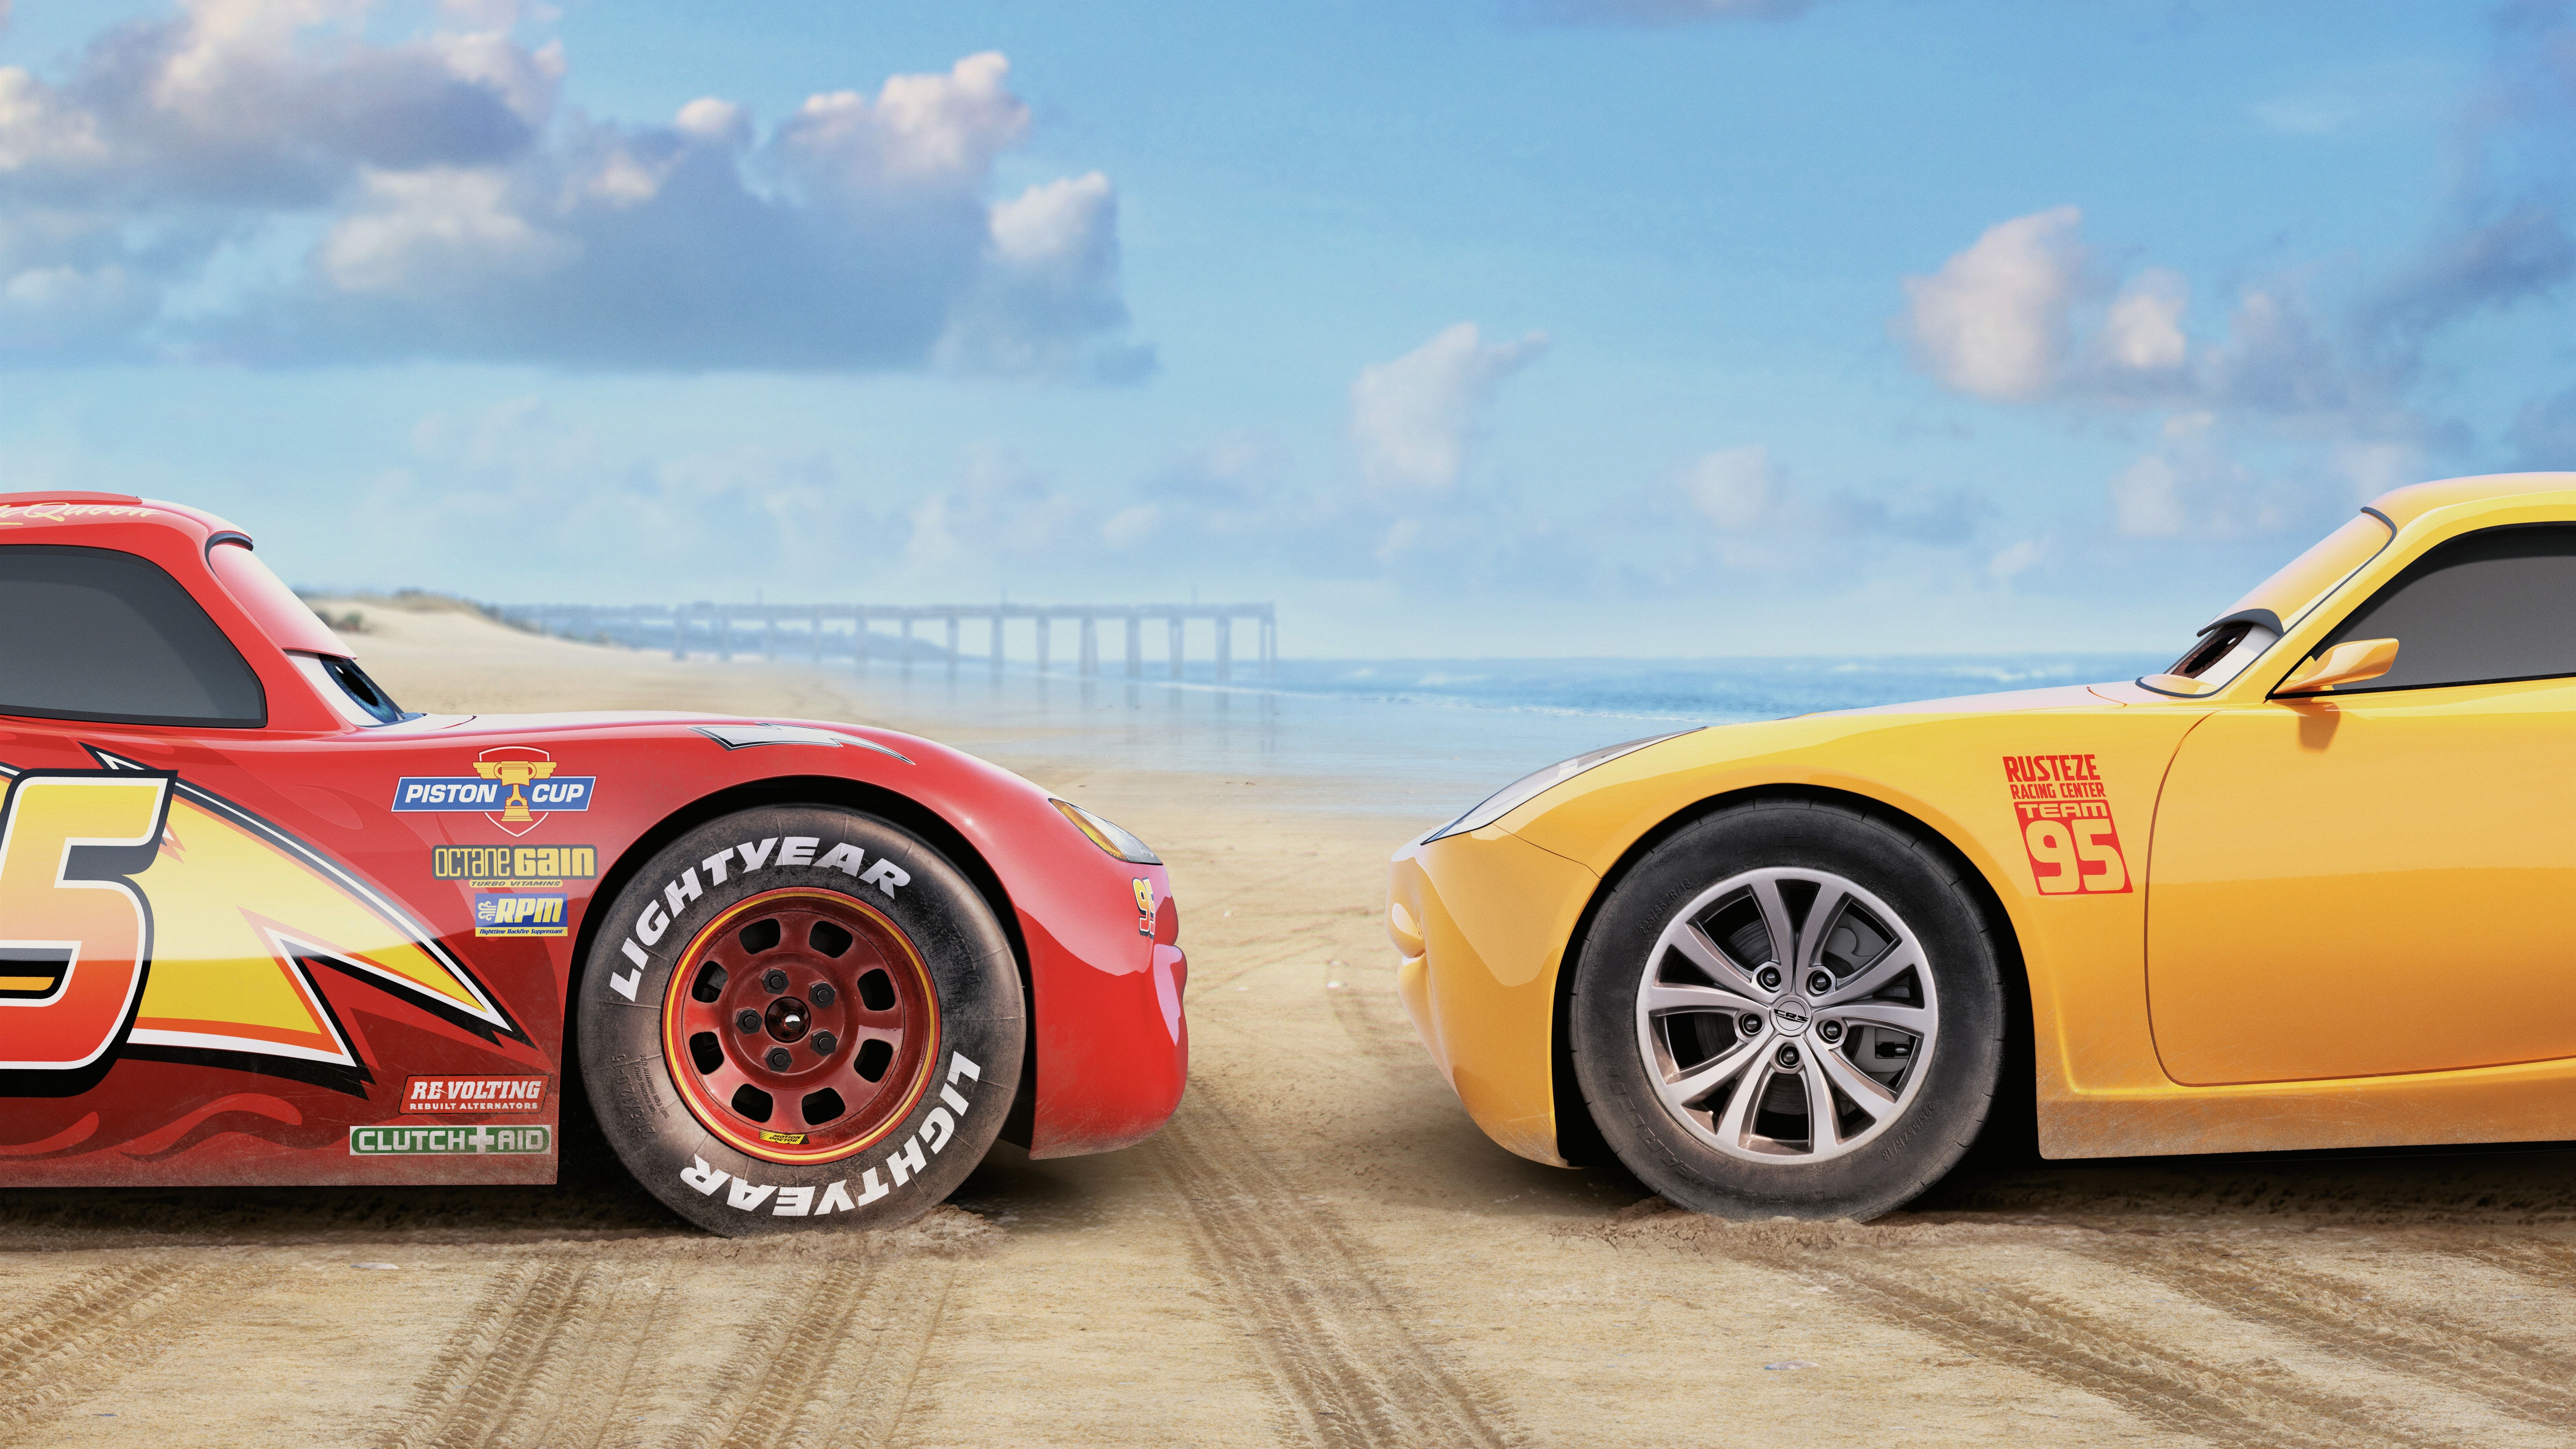 Wallpaper Cars red and yellow car 7680x4320 UHD 8K Picture, Image